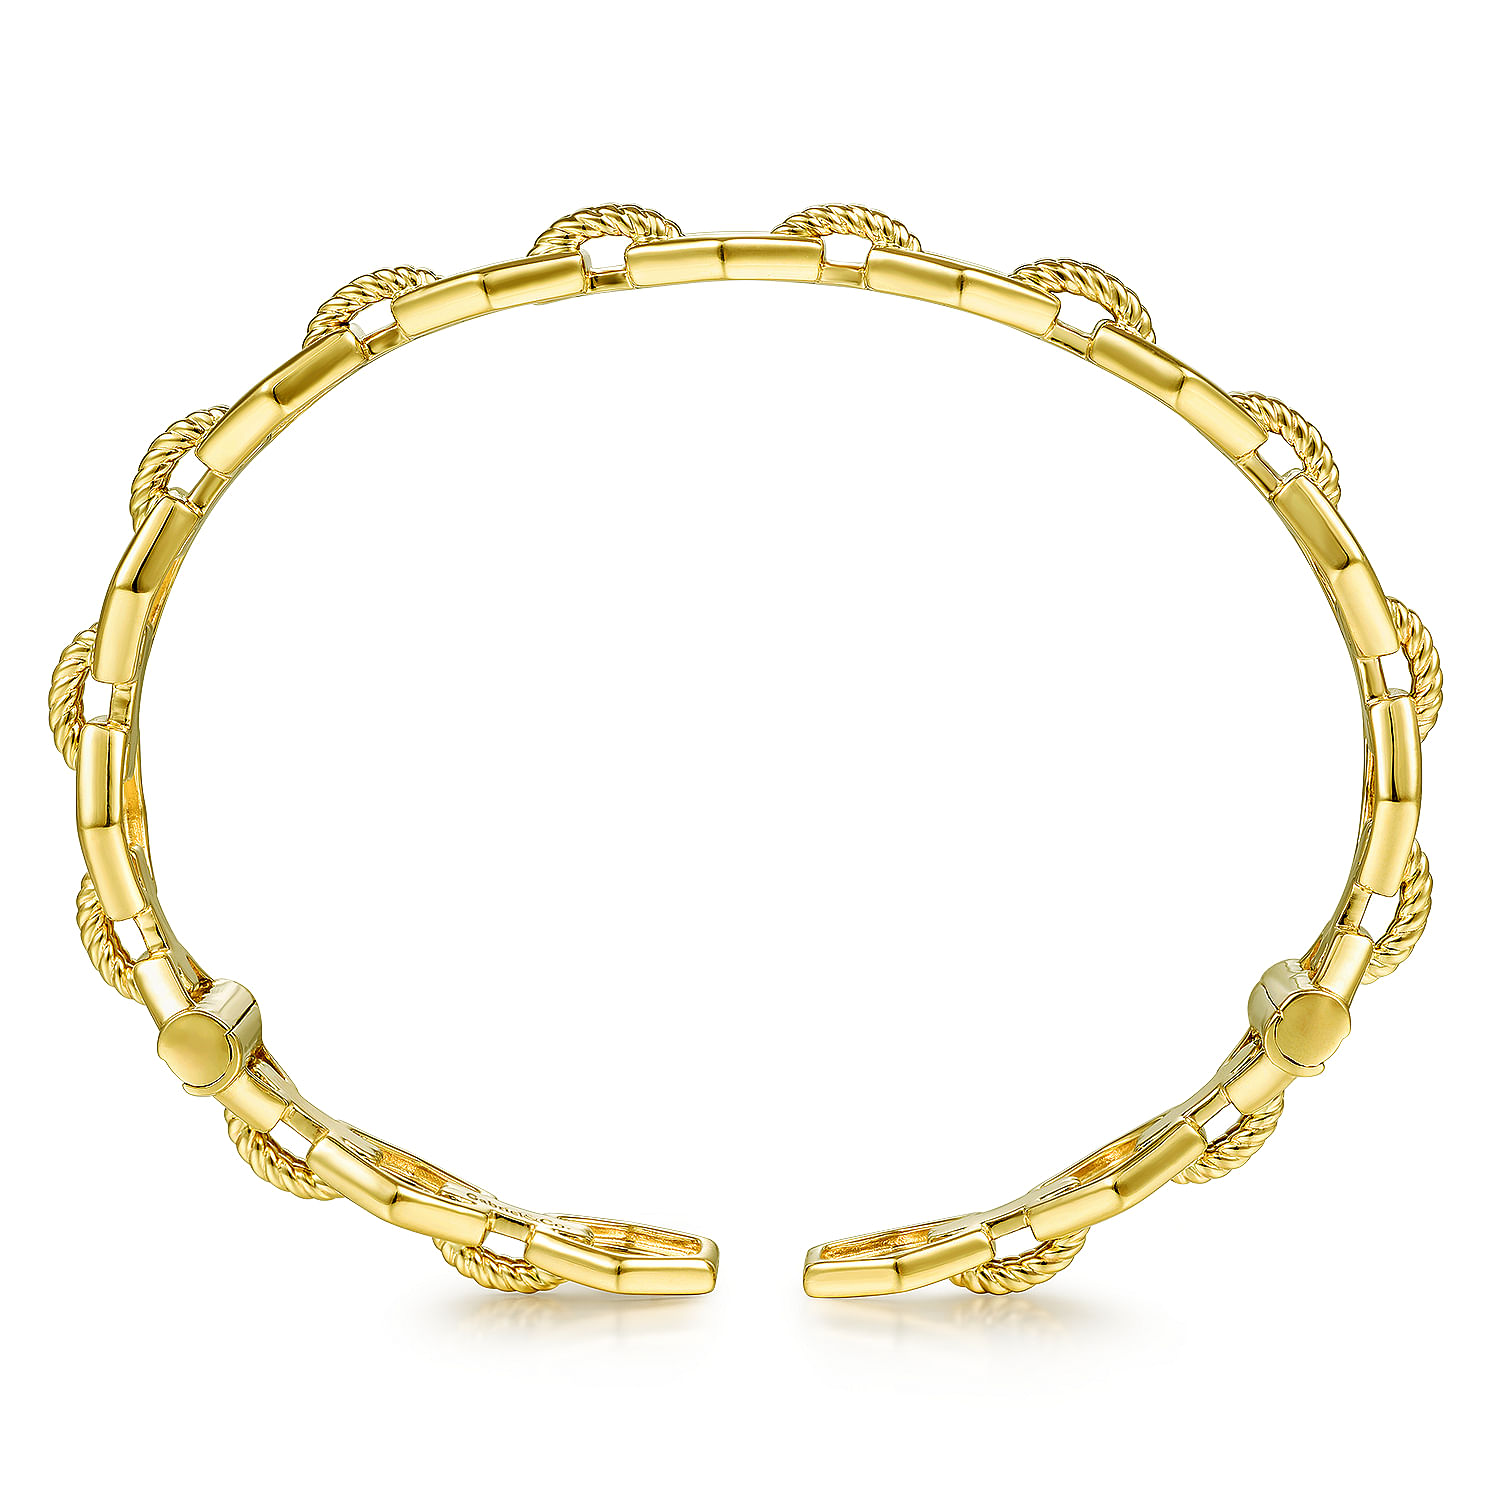 14K Yellow Gold High Polished Chain Link Cuff Bracelet with Twisted Rope Connectors